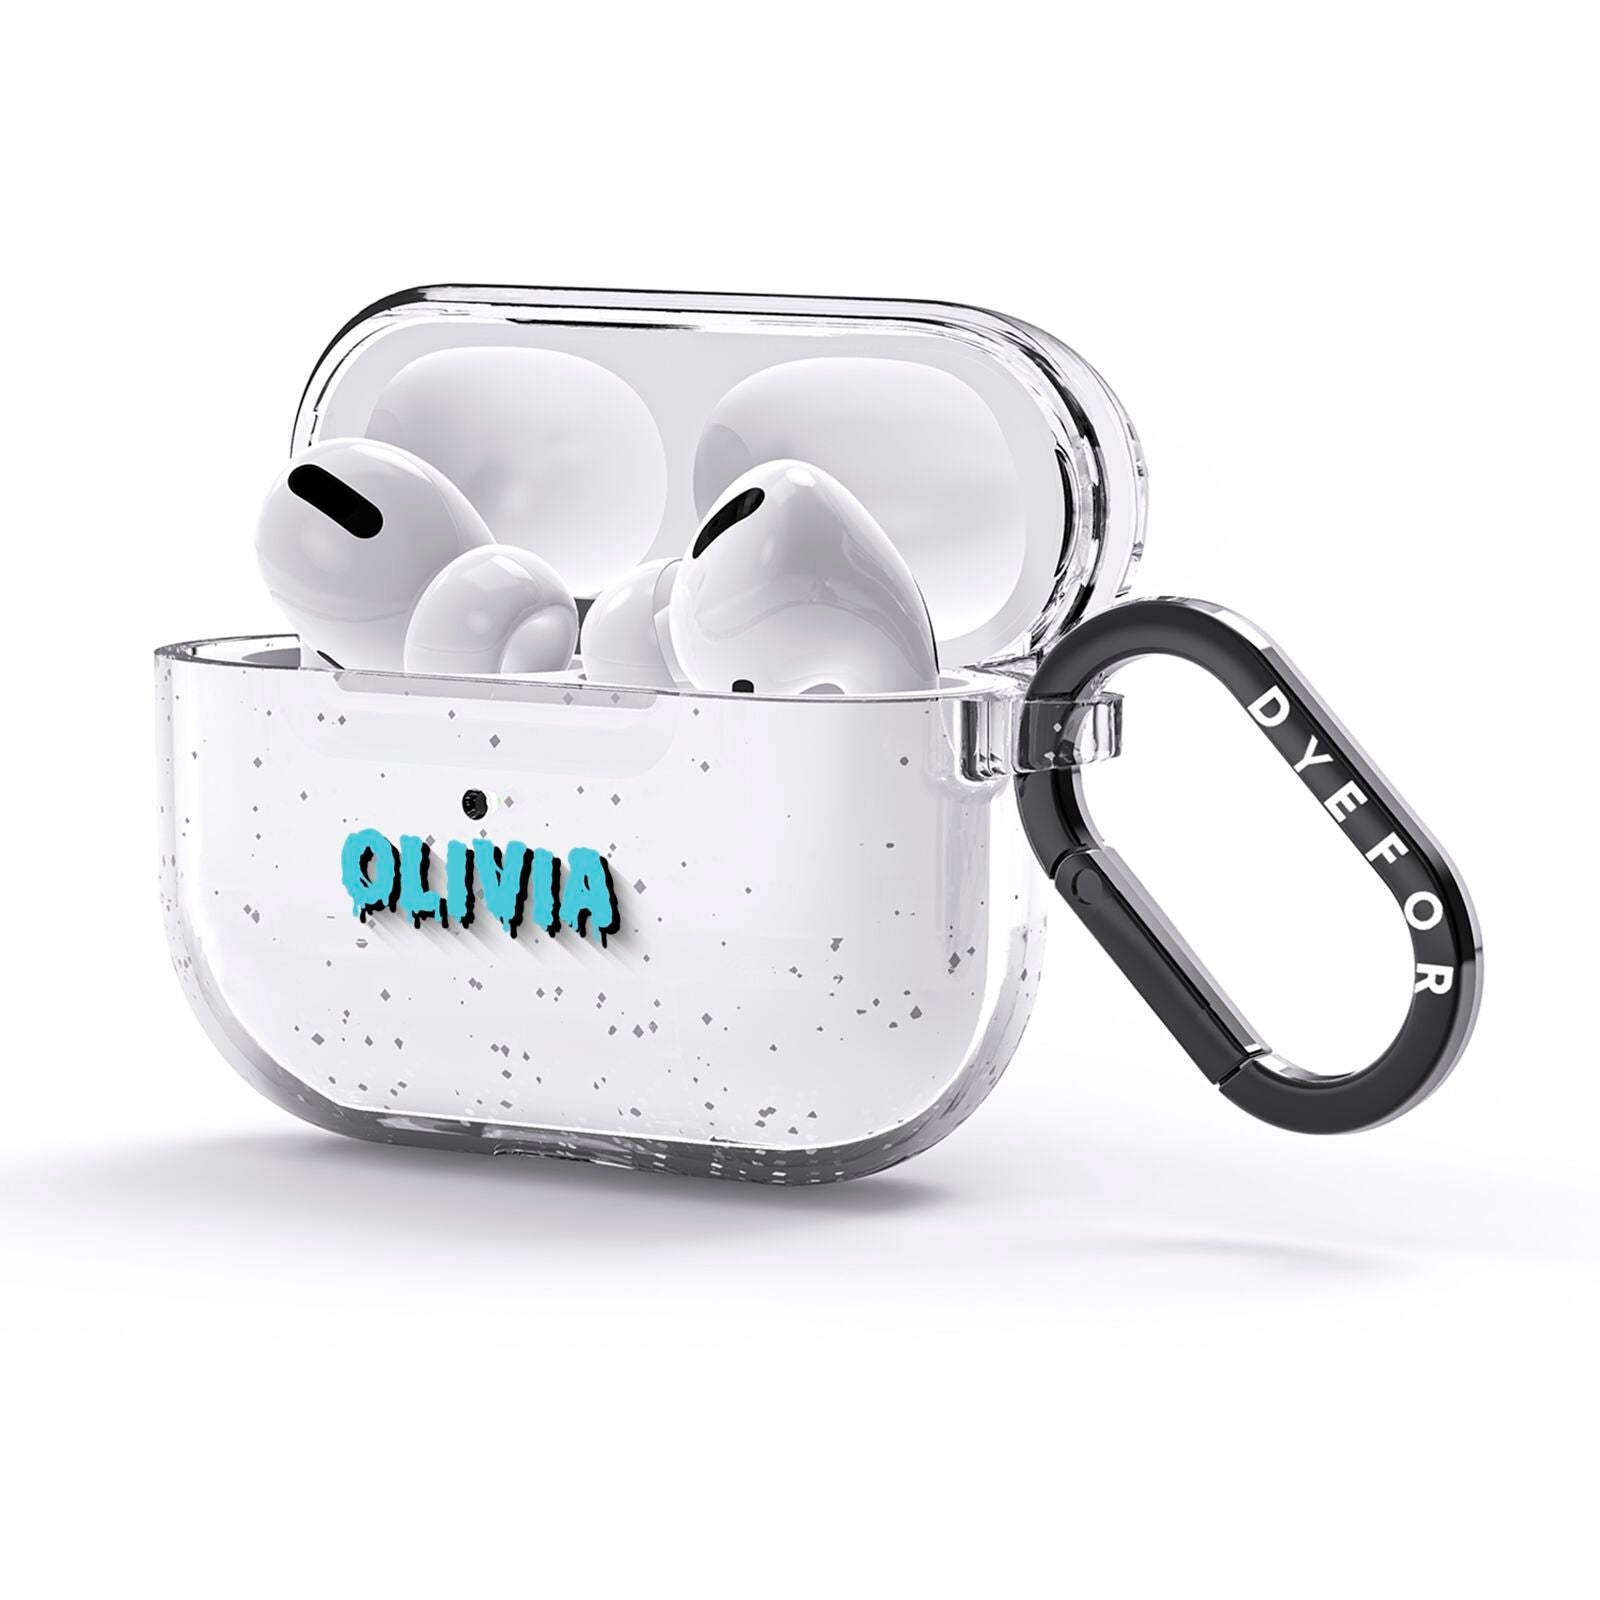 Blue Slime Text AirPods Glitter Case 3rd Gen Side Image